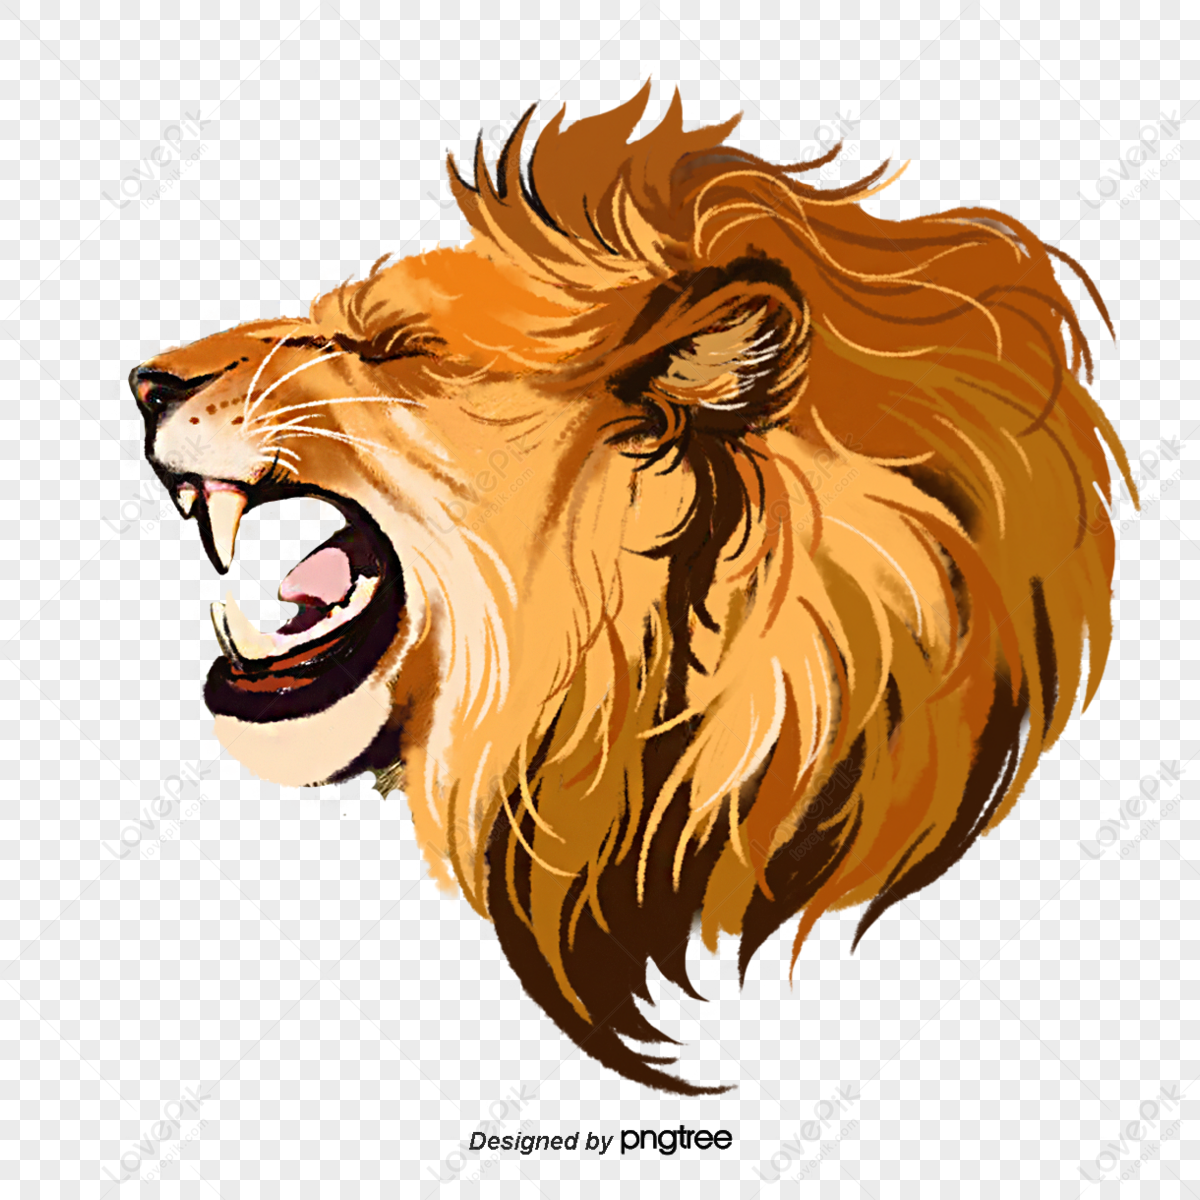 Angry lion roaring logo Royalty Free Vector Image